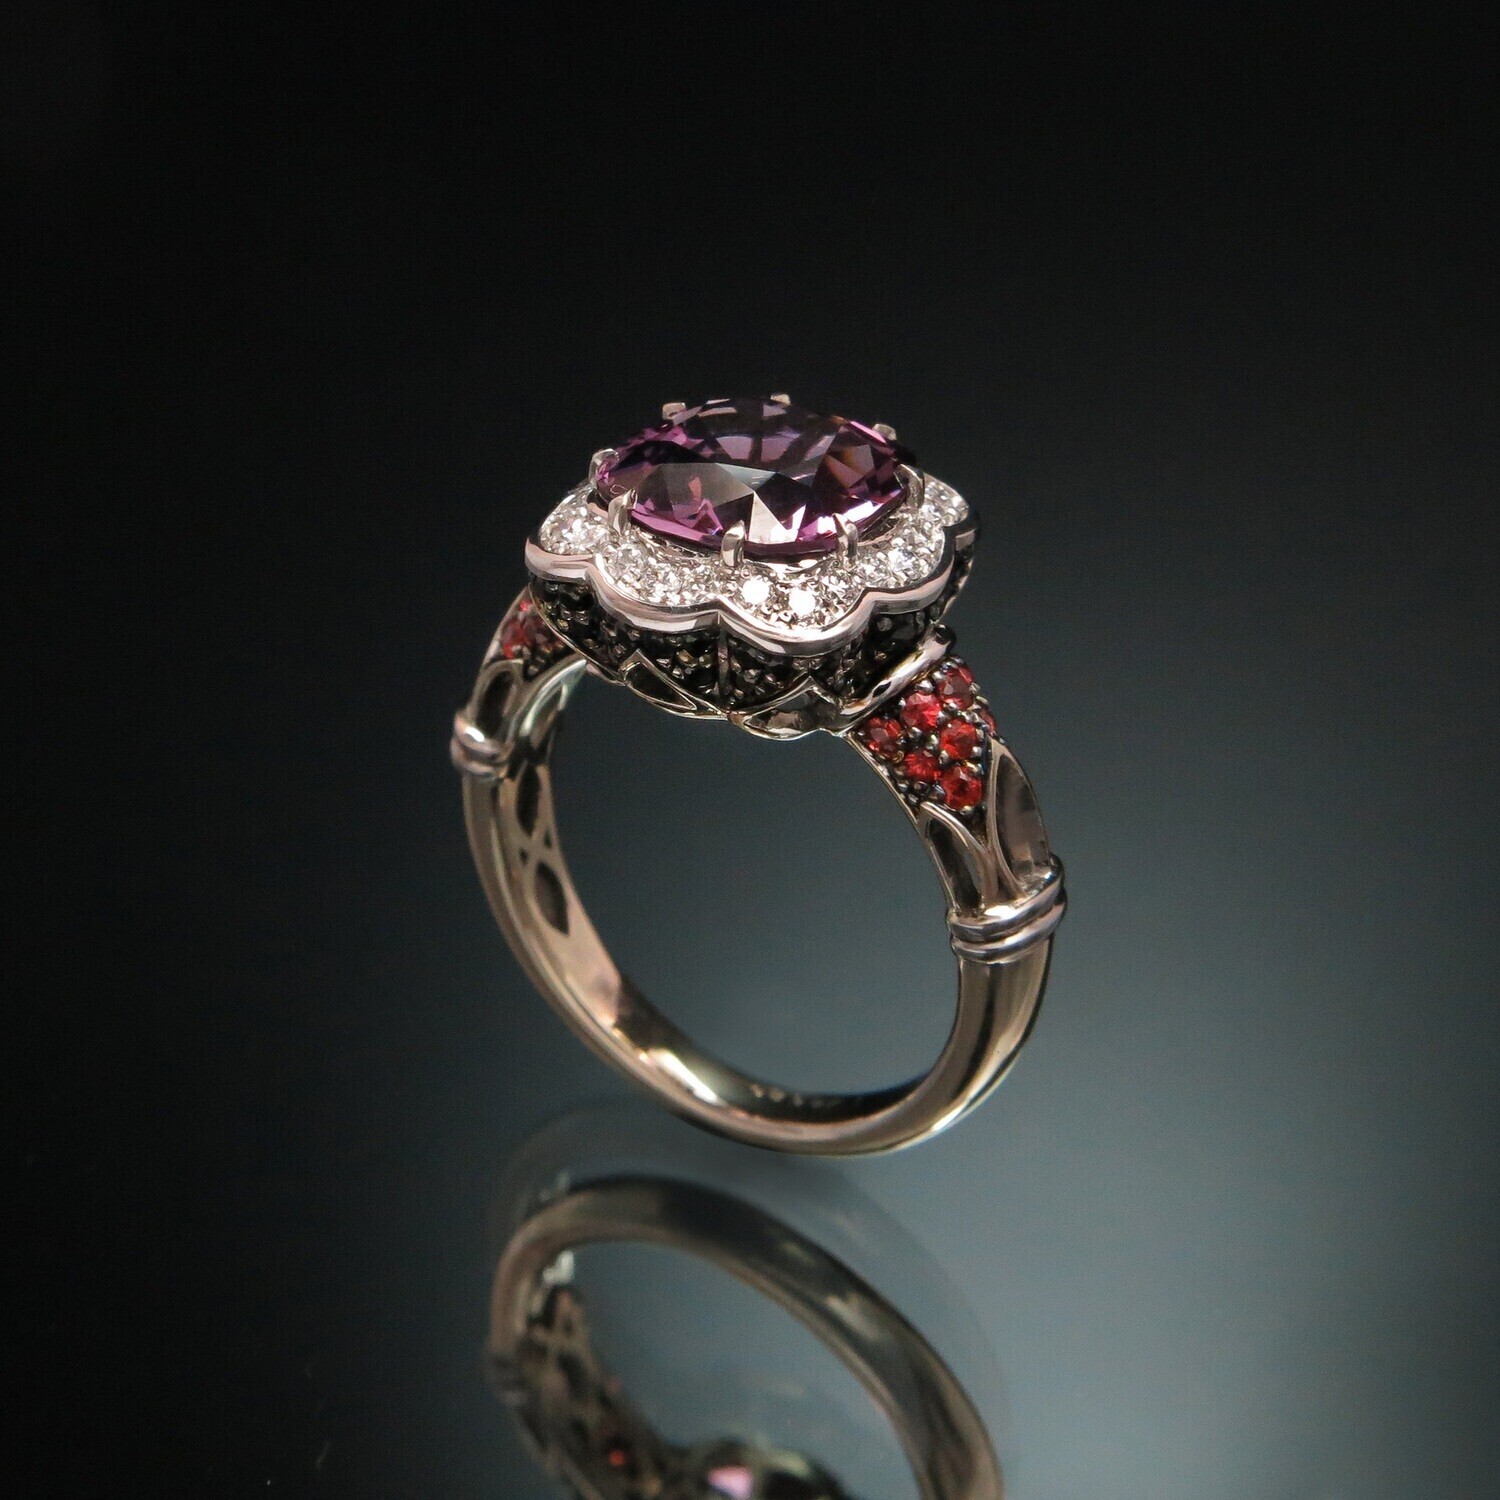 Set 18K Gold Ring with Pink Spinel, White and Black Diamonds